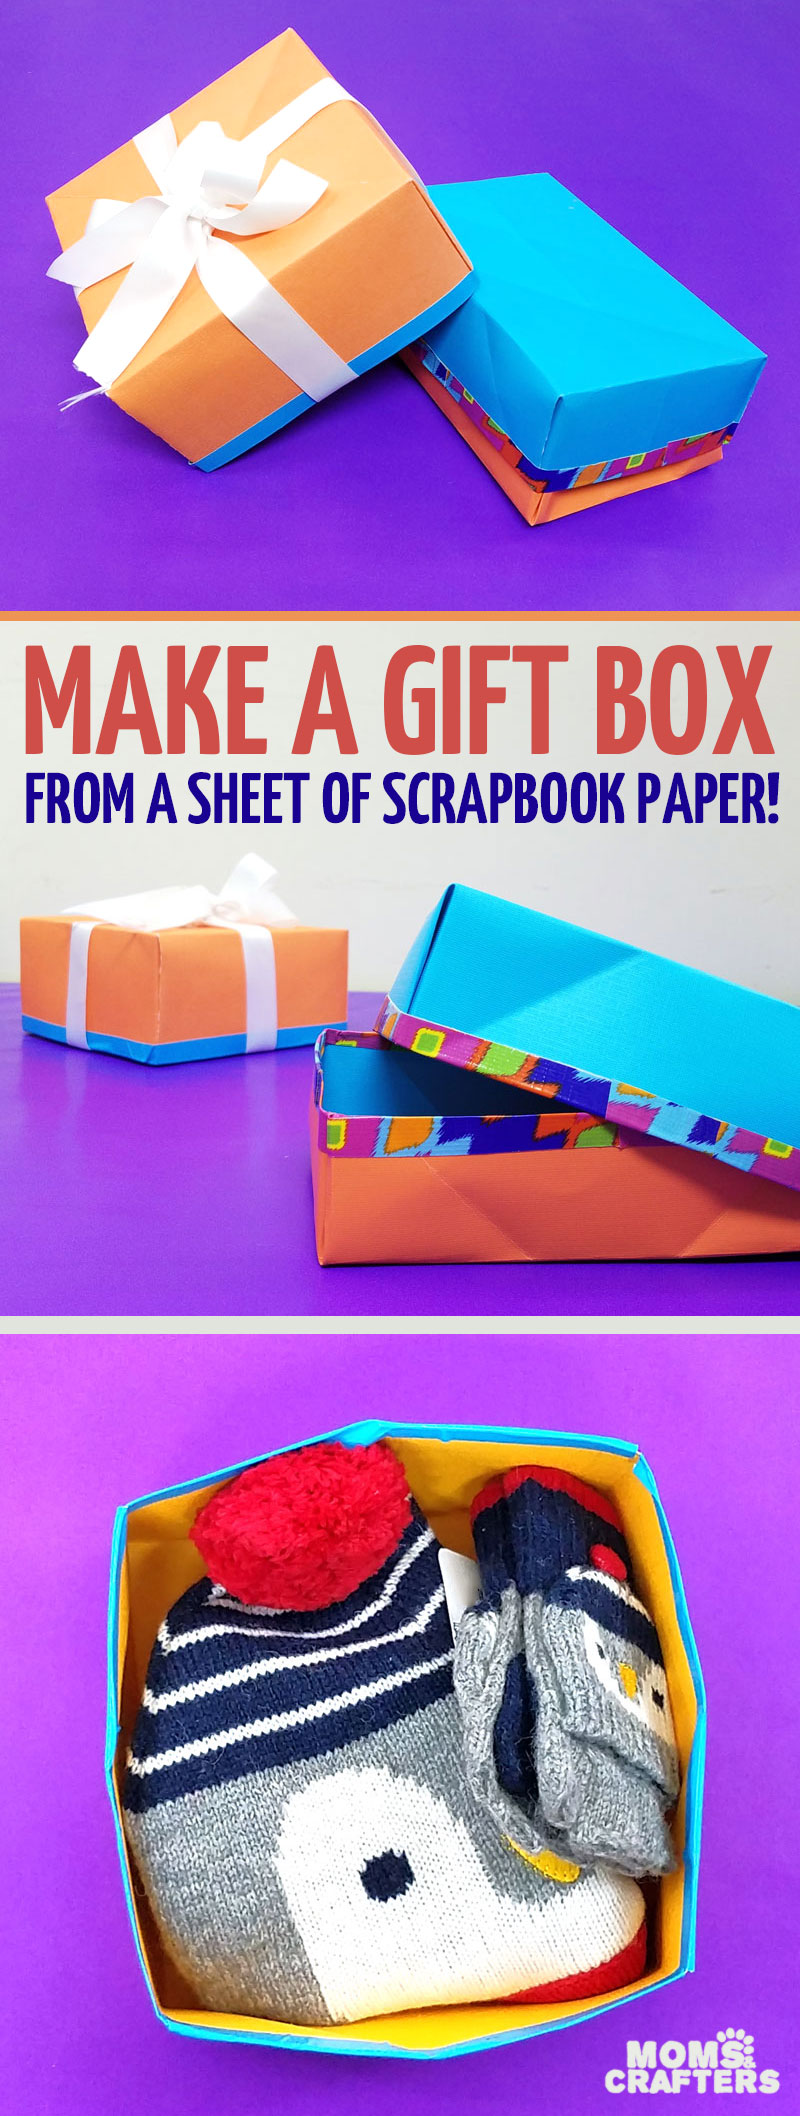 DIY Gift Box from a Sheet of Scrapbook Paper! * Moms and Crafters